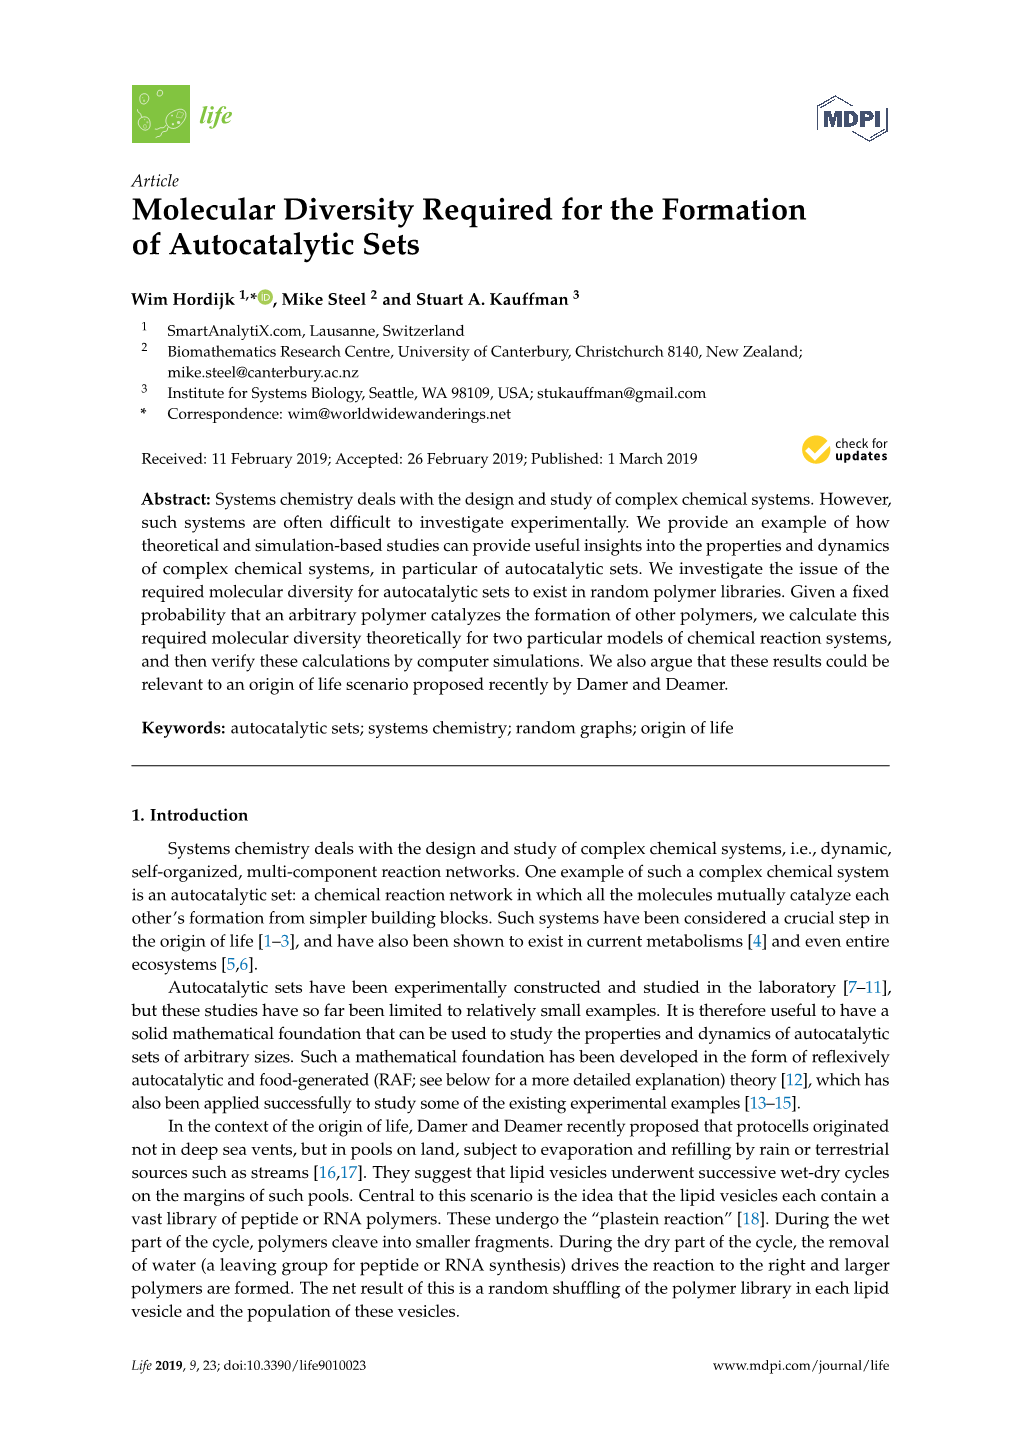 Molecular Diversity Required for the Formation of Autocatalytic Sets